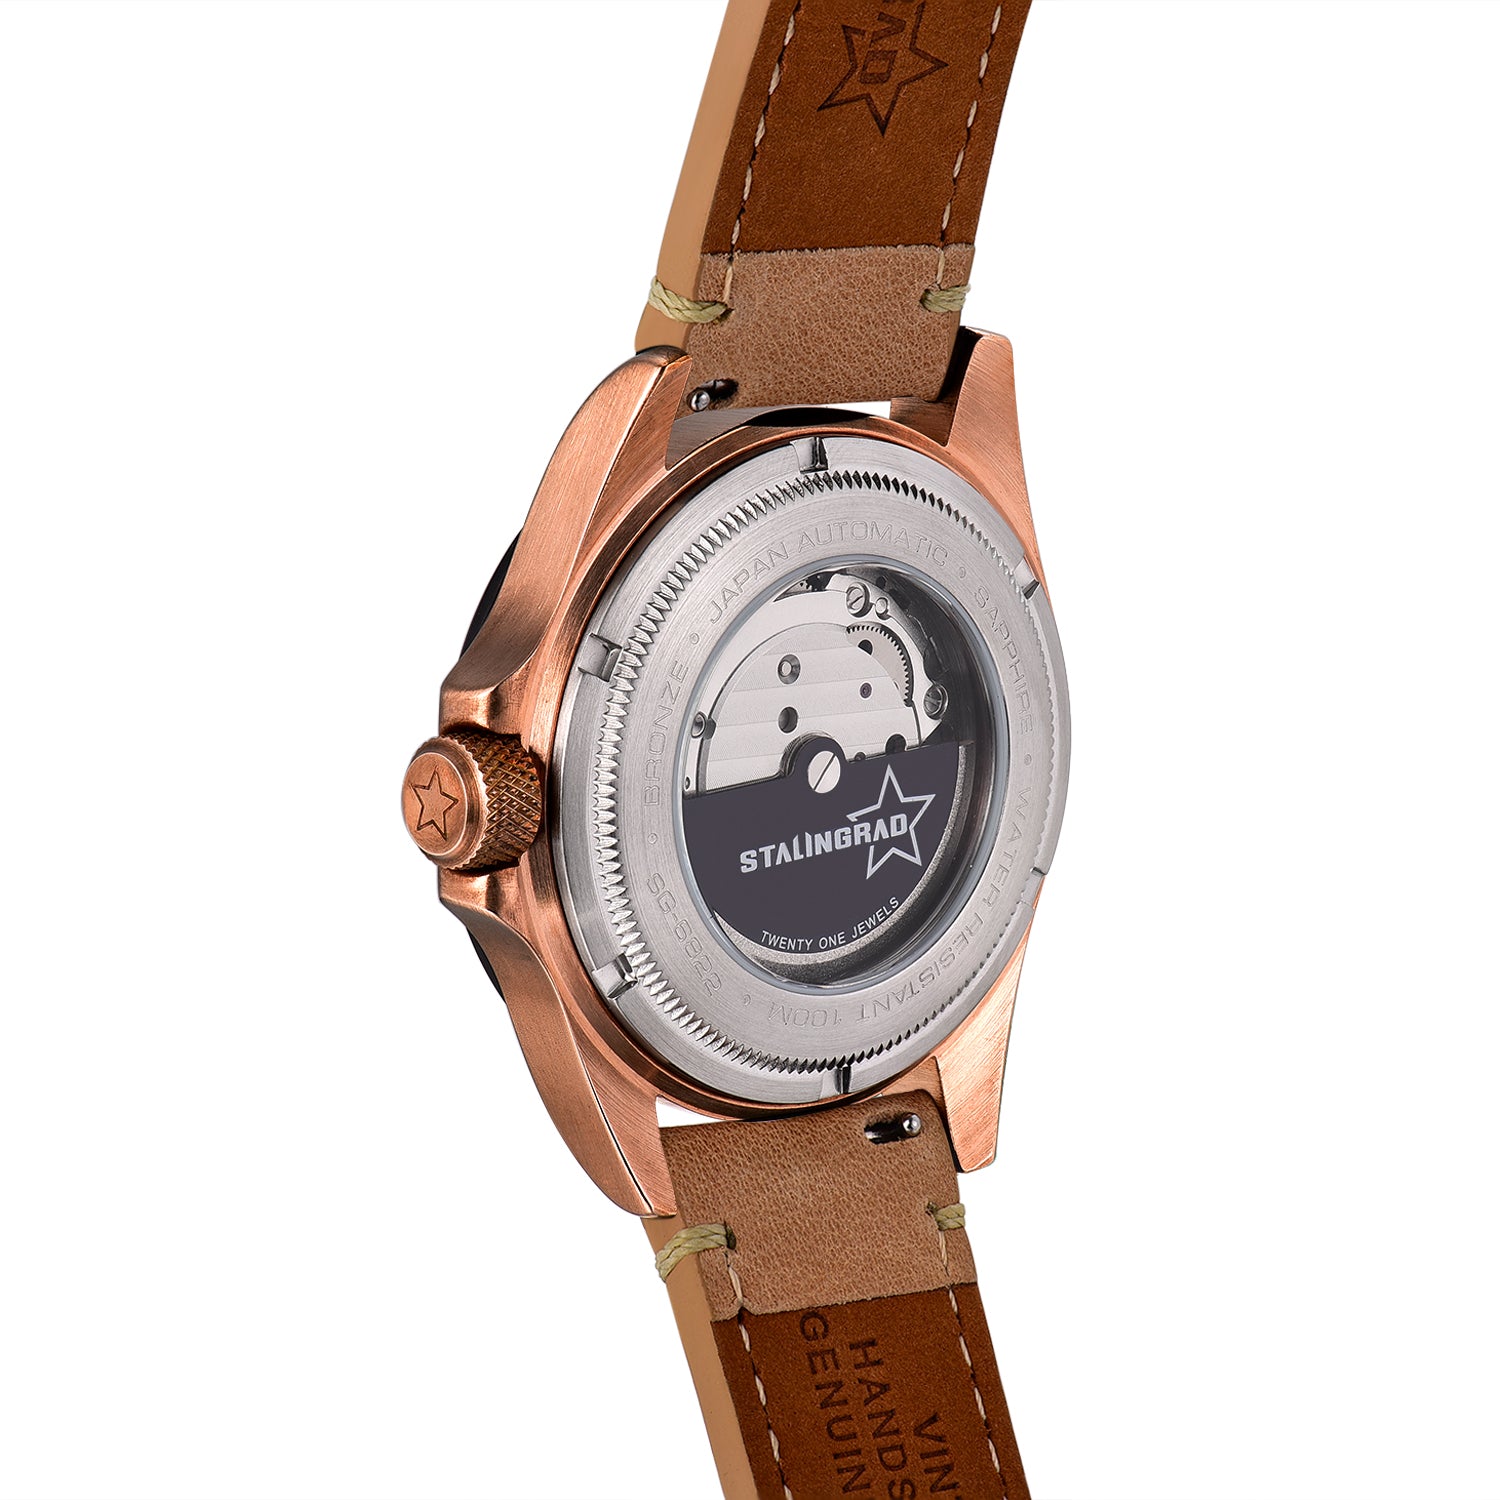 Stalingrad Mikoyan Watch Bronze Case  diaplay case back showing the star on the crown and the tan leather strap on a white background